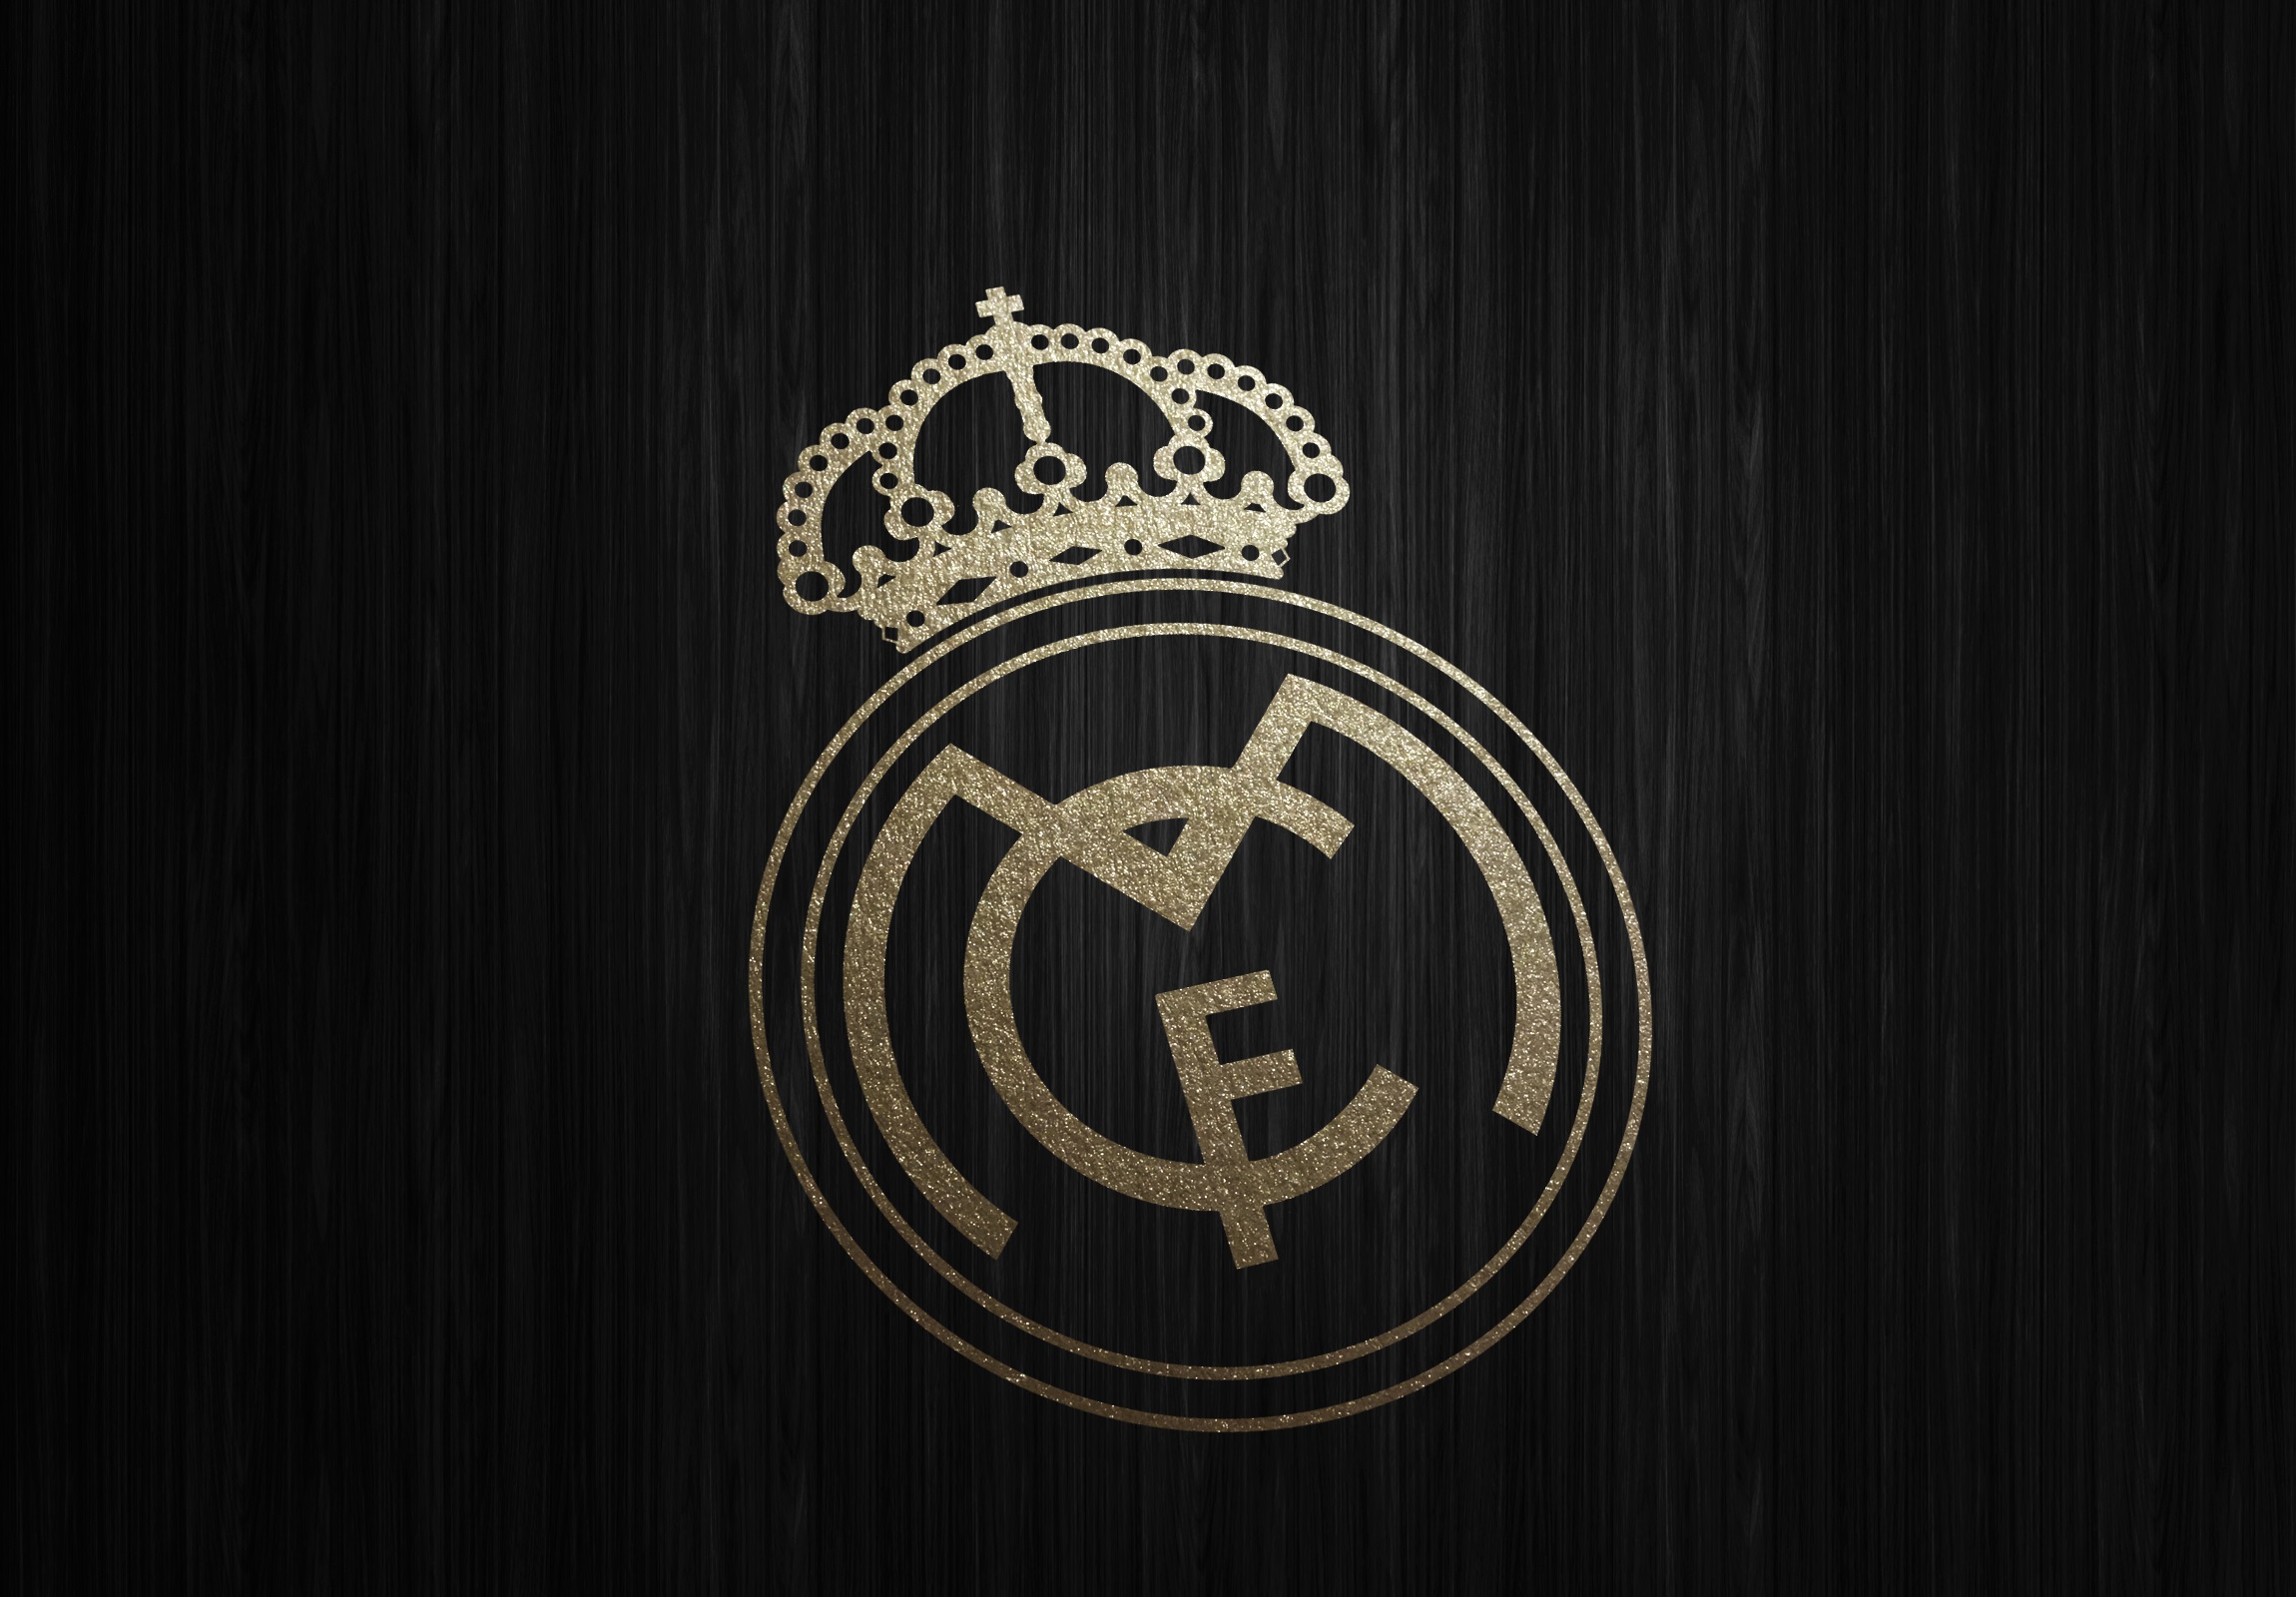 Real Madrid Wallpapers Background On Wallpaper Hd 2300 - Background Hd Real Madrid - HD Wallpaper 